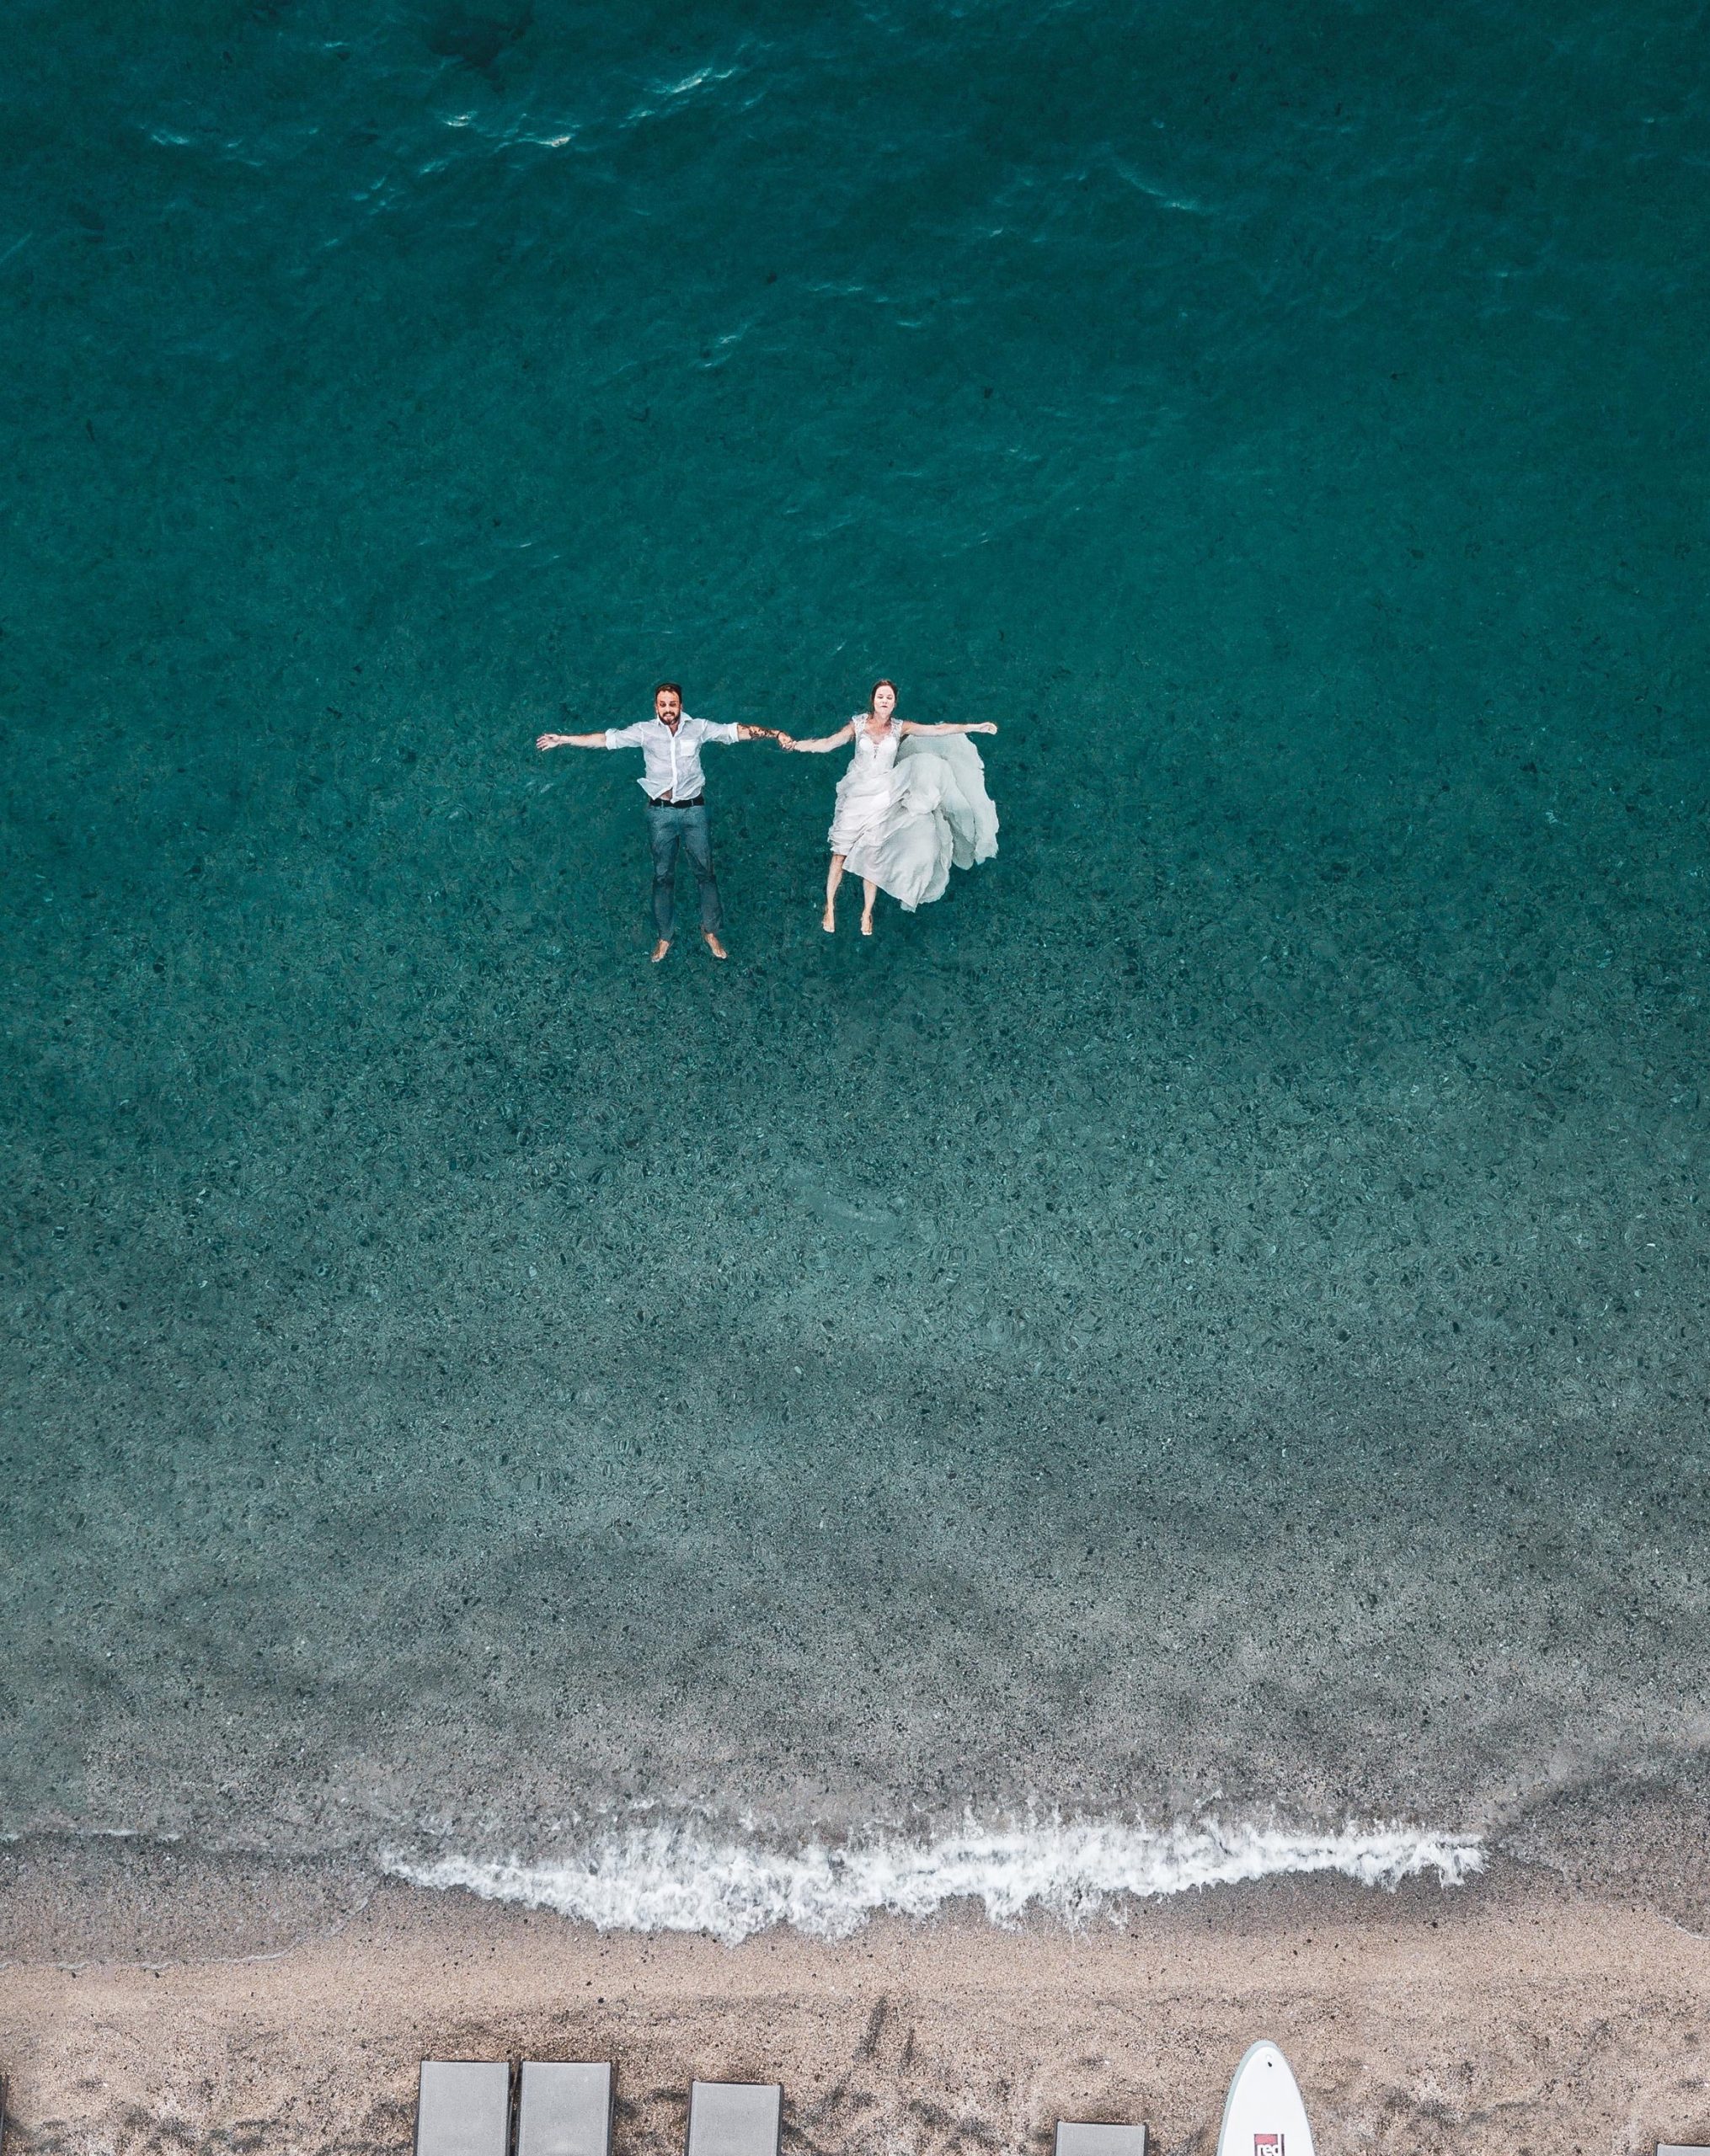 Wedding aerial and drone photography are excellent opportunities to capture moments of celebration of affection in the presence of loved ones - Bogdan Ciocoiu